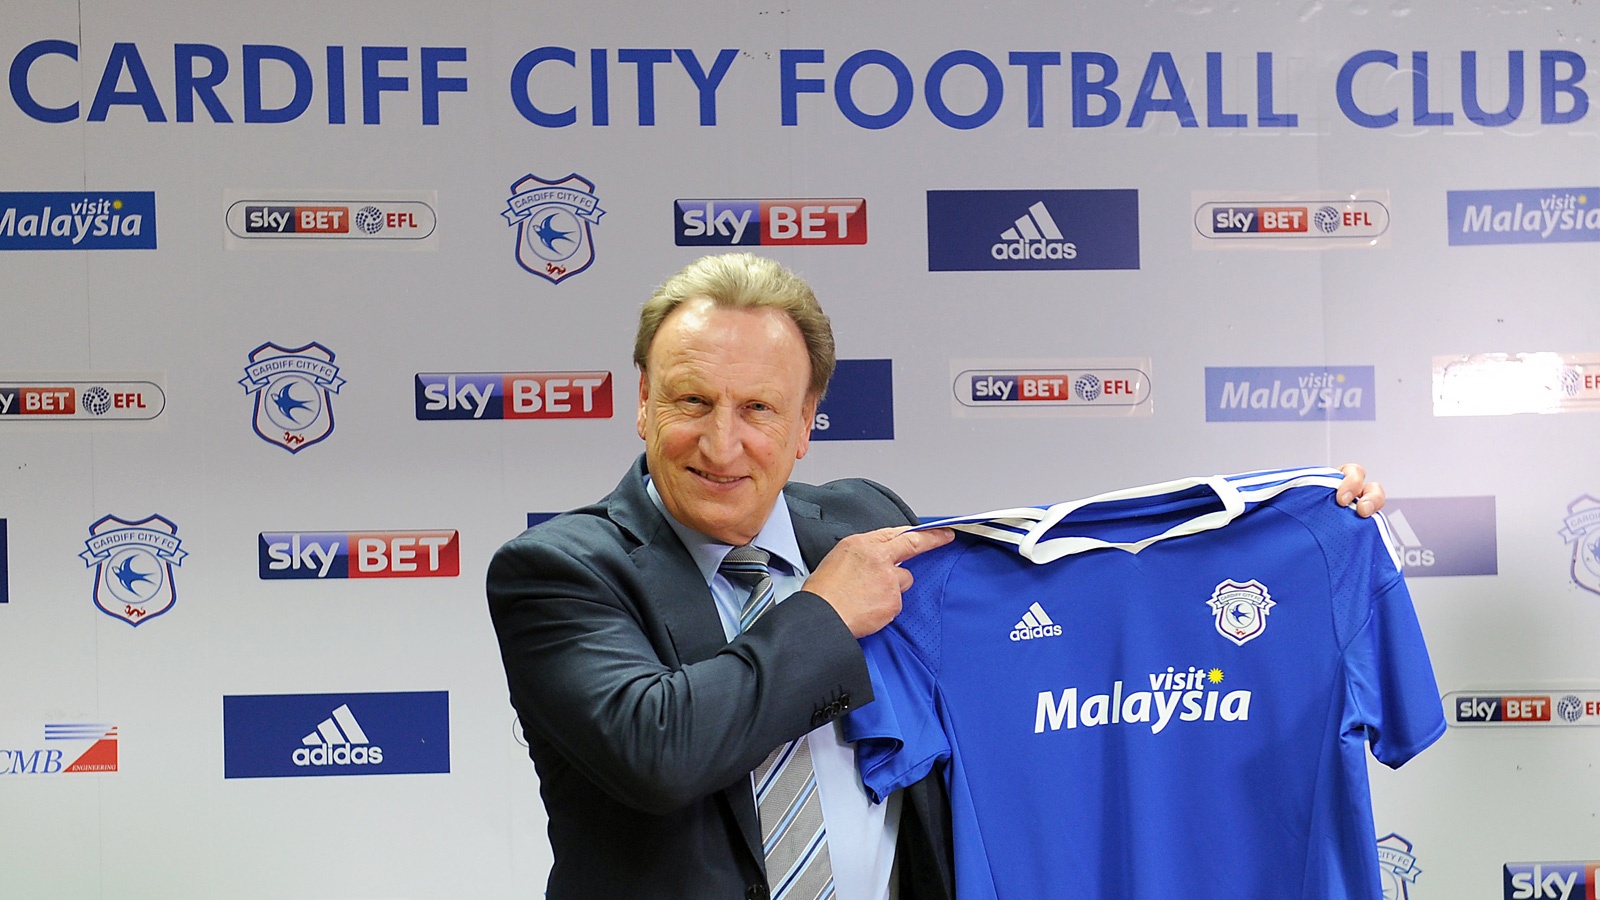 Cardiff City FC on X: Welcome to #CardiffCity, @ConnorWickham10